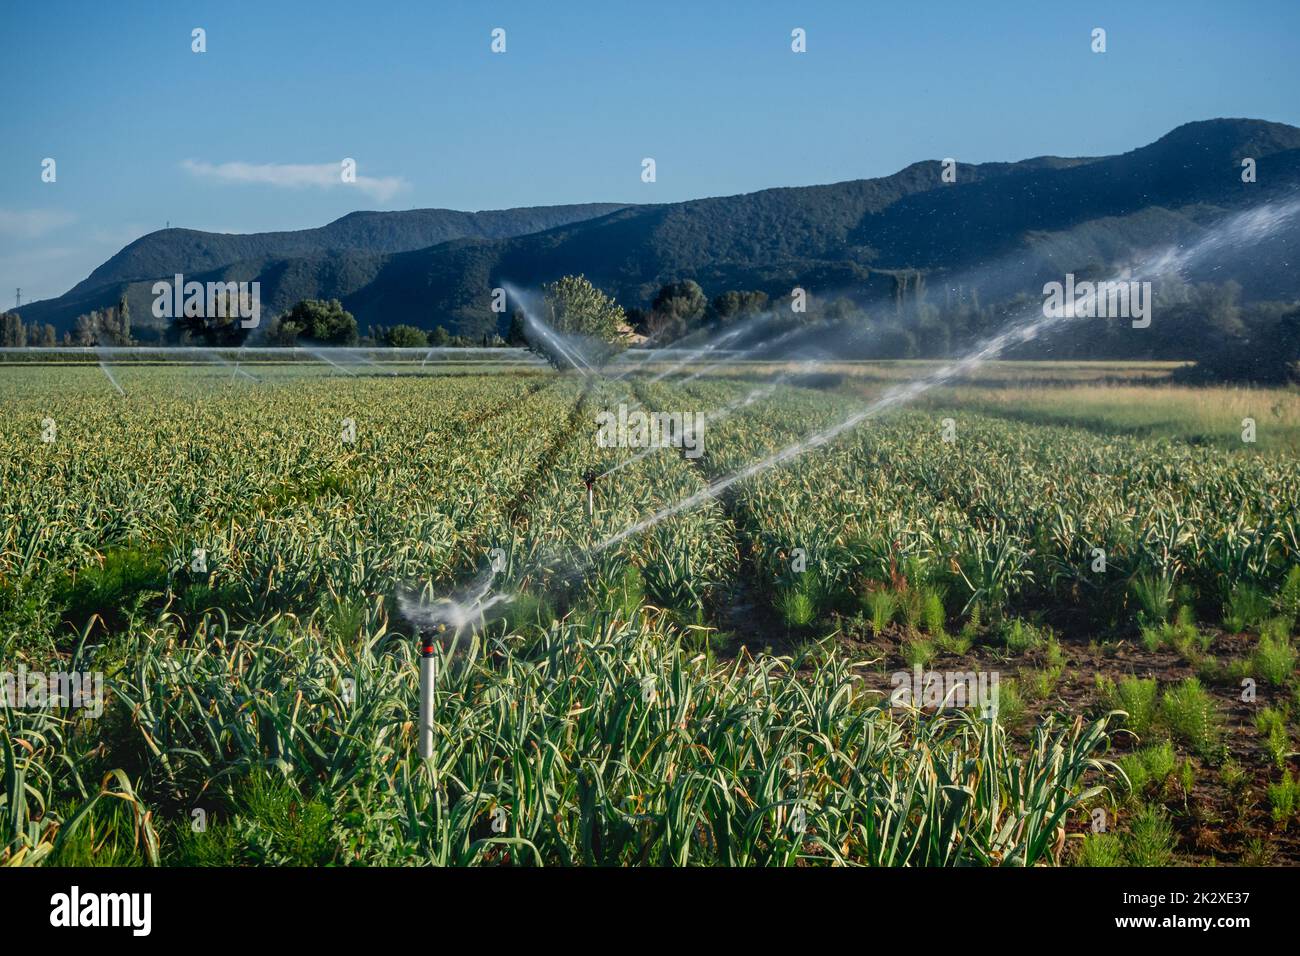 Sprinklers watering the farmland with a view of the mountains Stock Photo